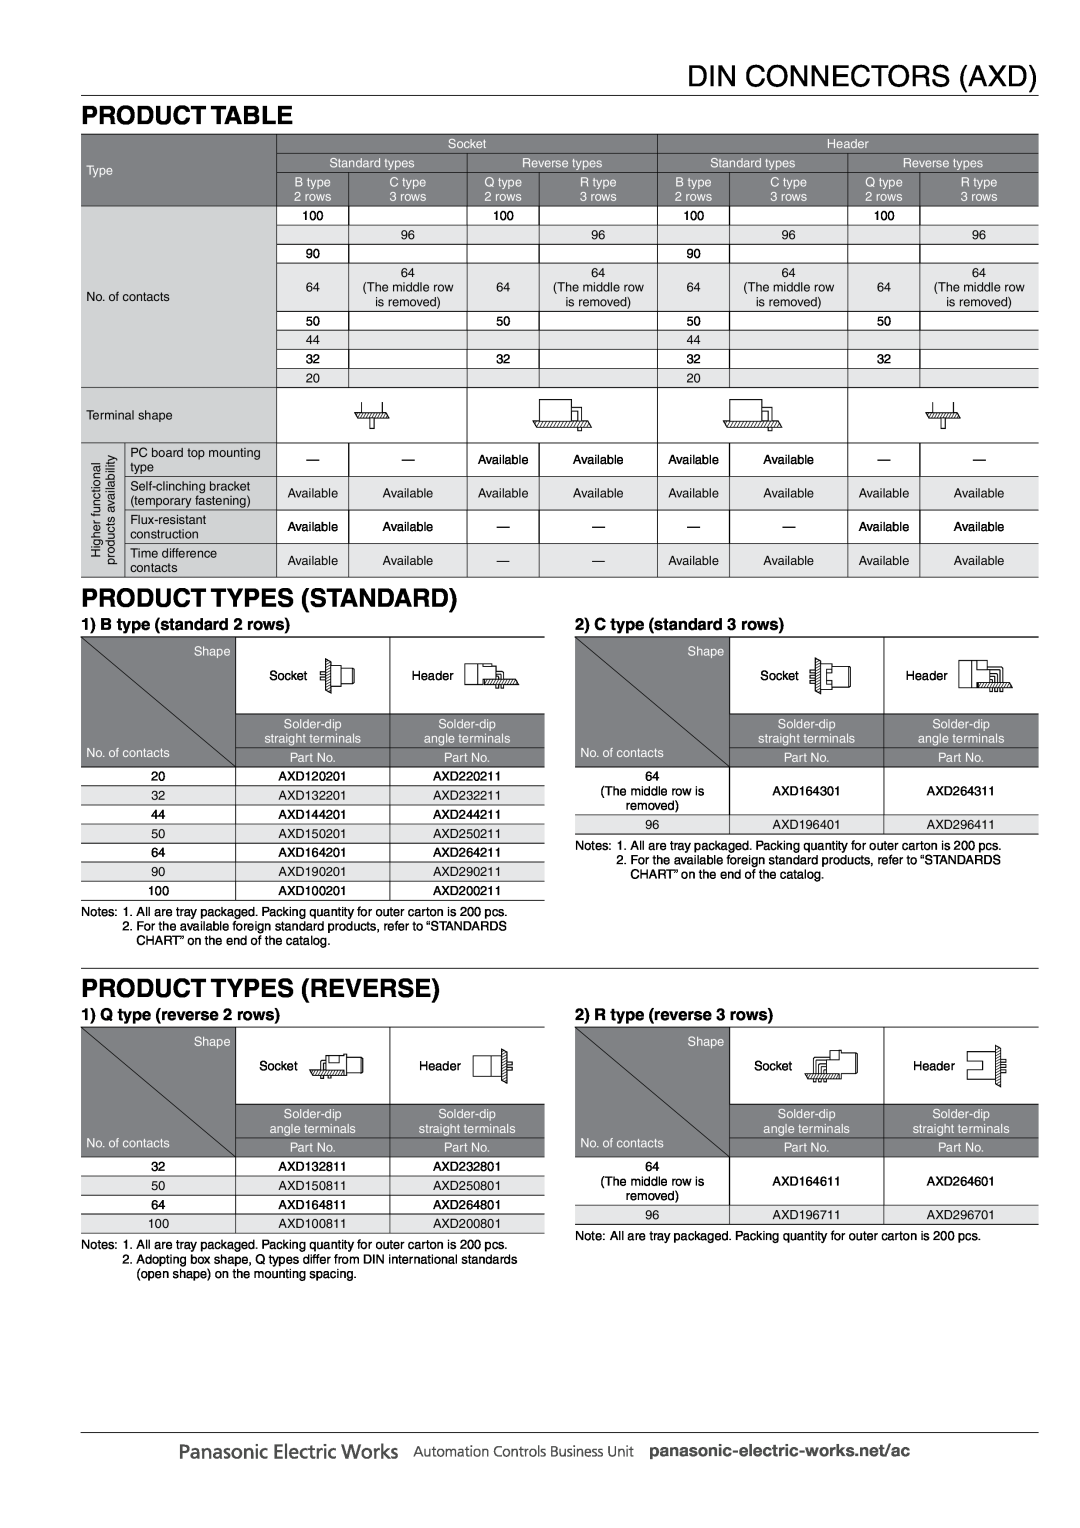 Panasonic DIN Connectors manual Product Table, Product Types Standard, Product Types Reverse, B type standard 2 rows 